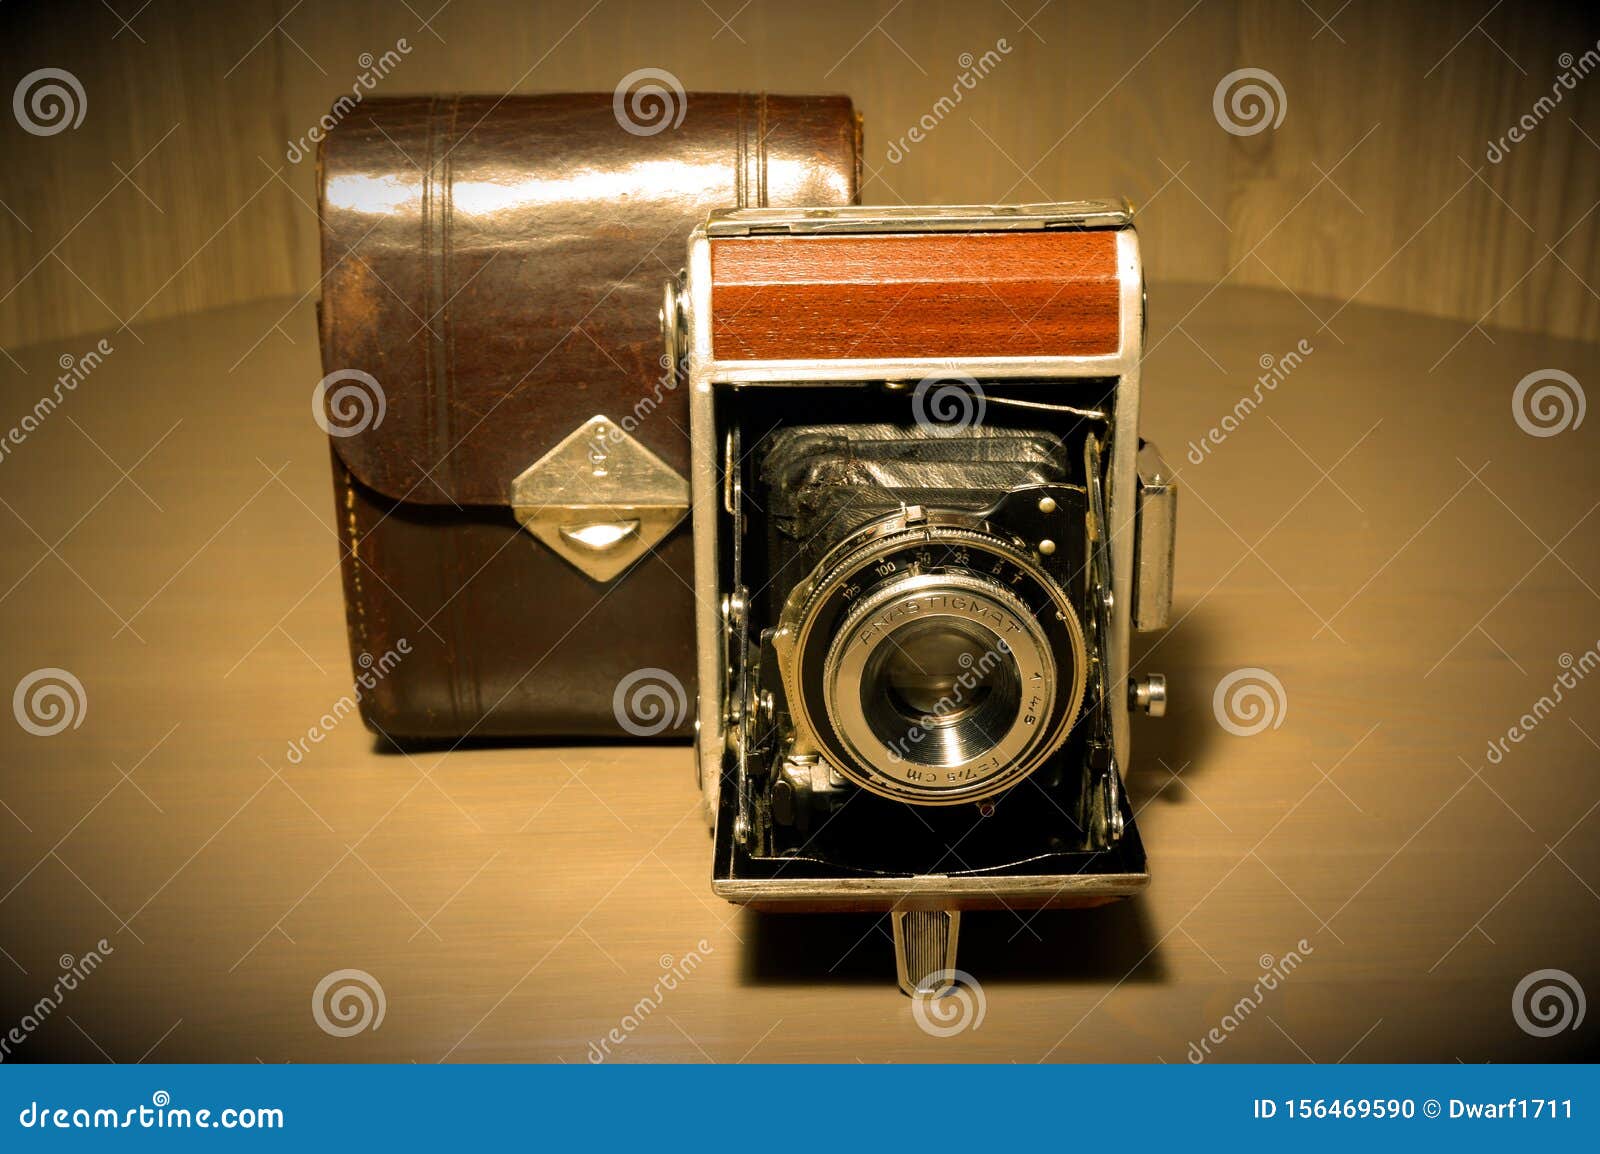 Retro old vintage outdated manual film camera circa 1940s and leather camera case on wooden table. Vintage style sepia vignette photo.